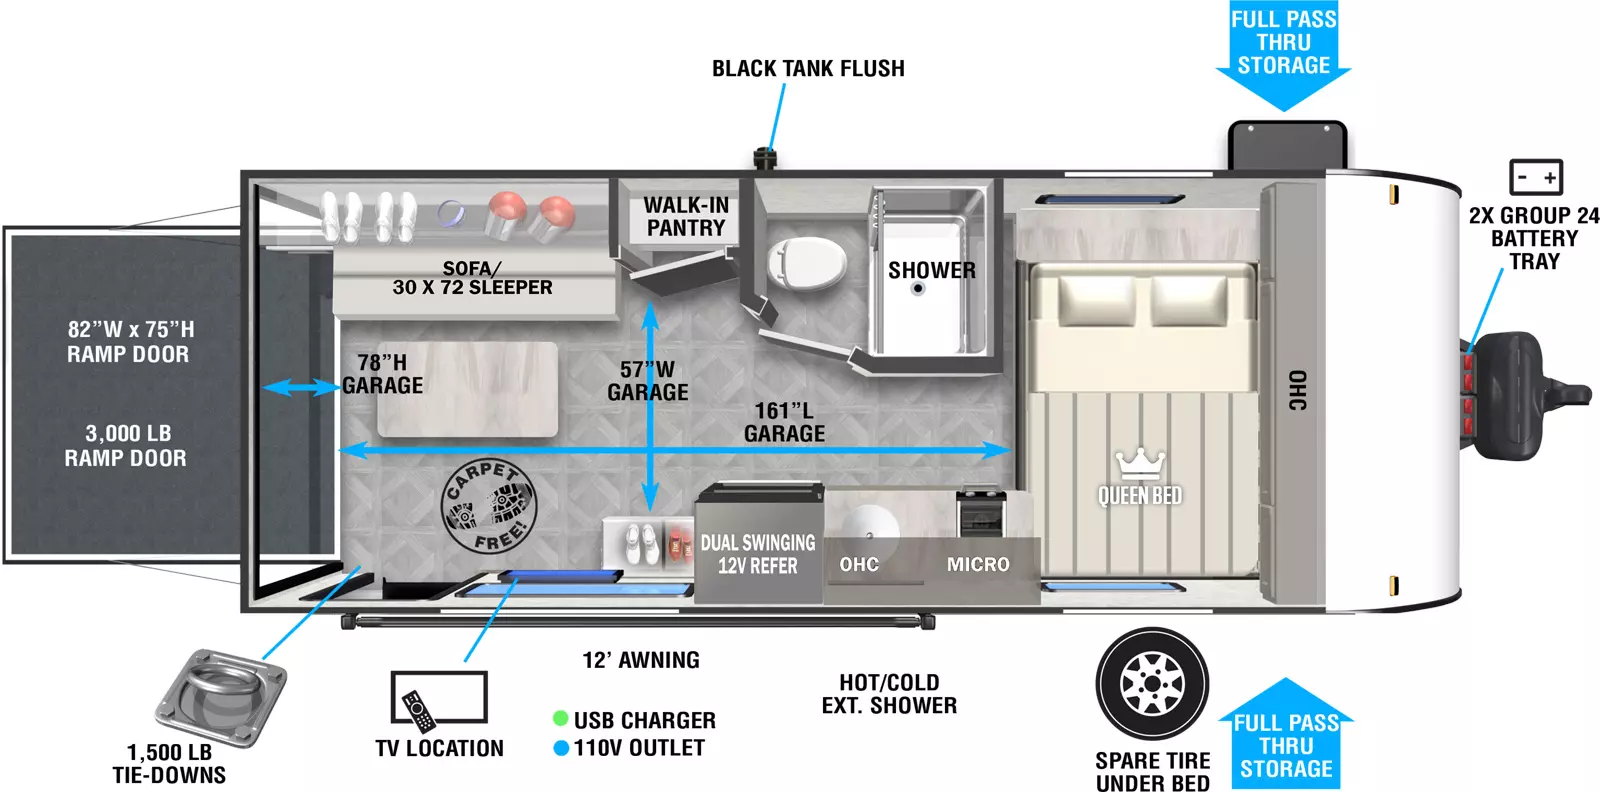 The 181RT has one entry, zero slideouts, and a rear 3,000 pound ramp door. Exterior features front pass-through storage, 2x group 24 battery tray, black tank flush, hot and cold exterior shower, and 12 foot awning. Interior layout front to back: side-facing queen bed with spare tire underneath, and overhead cabinets; off-door side side-aisle bathroom with toilet and shower only; door side kitchen counter with cooktop, microwave, sink, overhead cabinet, and dual swinging 12 volt refrigerator; off-door side walk-in pantry; rear off-door side sofa/sleeper with table and overhead cabinet; rear door side TV location and entry; carpet-free RV and 1,500 pound tie downs. USB chargers and 110 volt outlets throughout. Garage dimensions: 161 inch garage length, 57 inch garage width, 78 inch garage height, 82 inch by 75 inch ramp door.